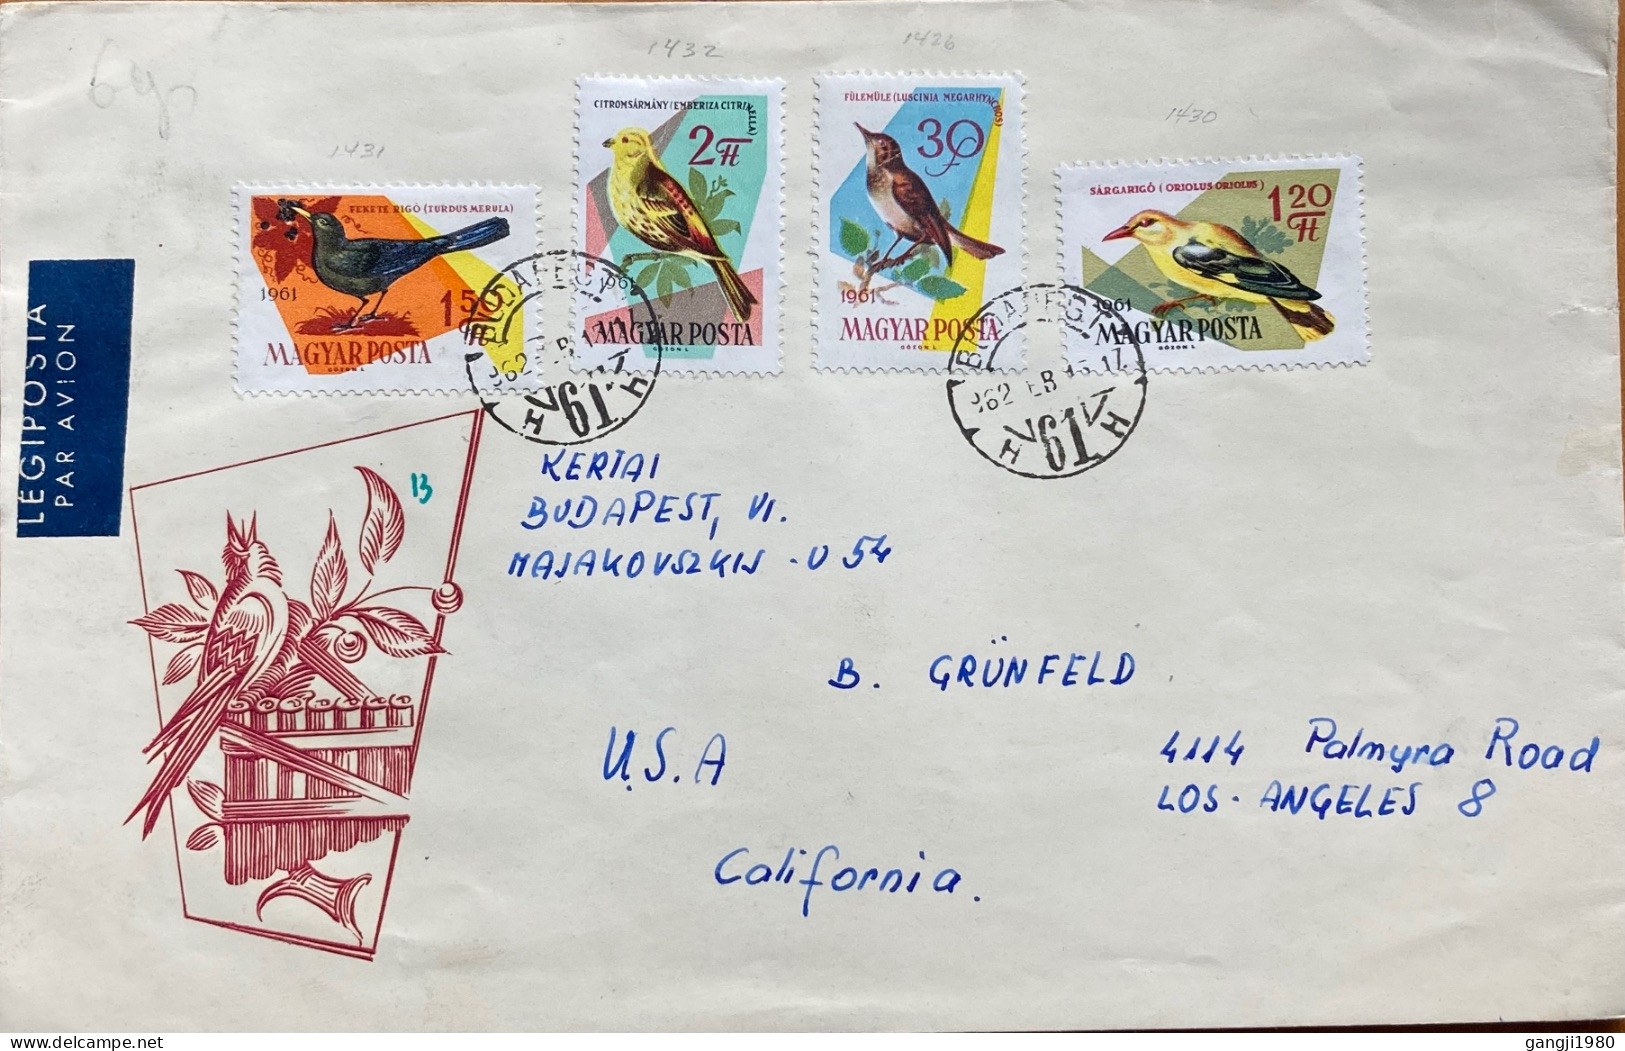 HUNGARY 1968, COVER ILLUSTRATE, AIRMAIL USED TO USA, 4 DIFFERENT BIRD STAMP, BUDAPEST CITY CANCEL. - Covers & Documents